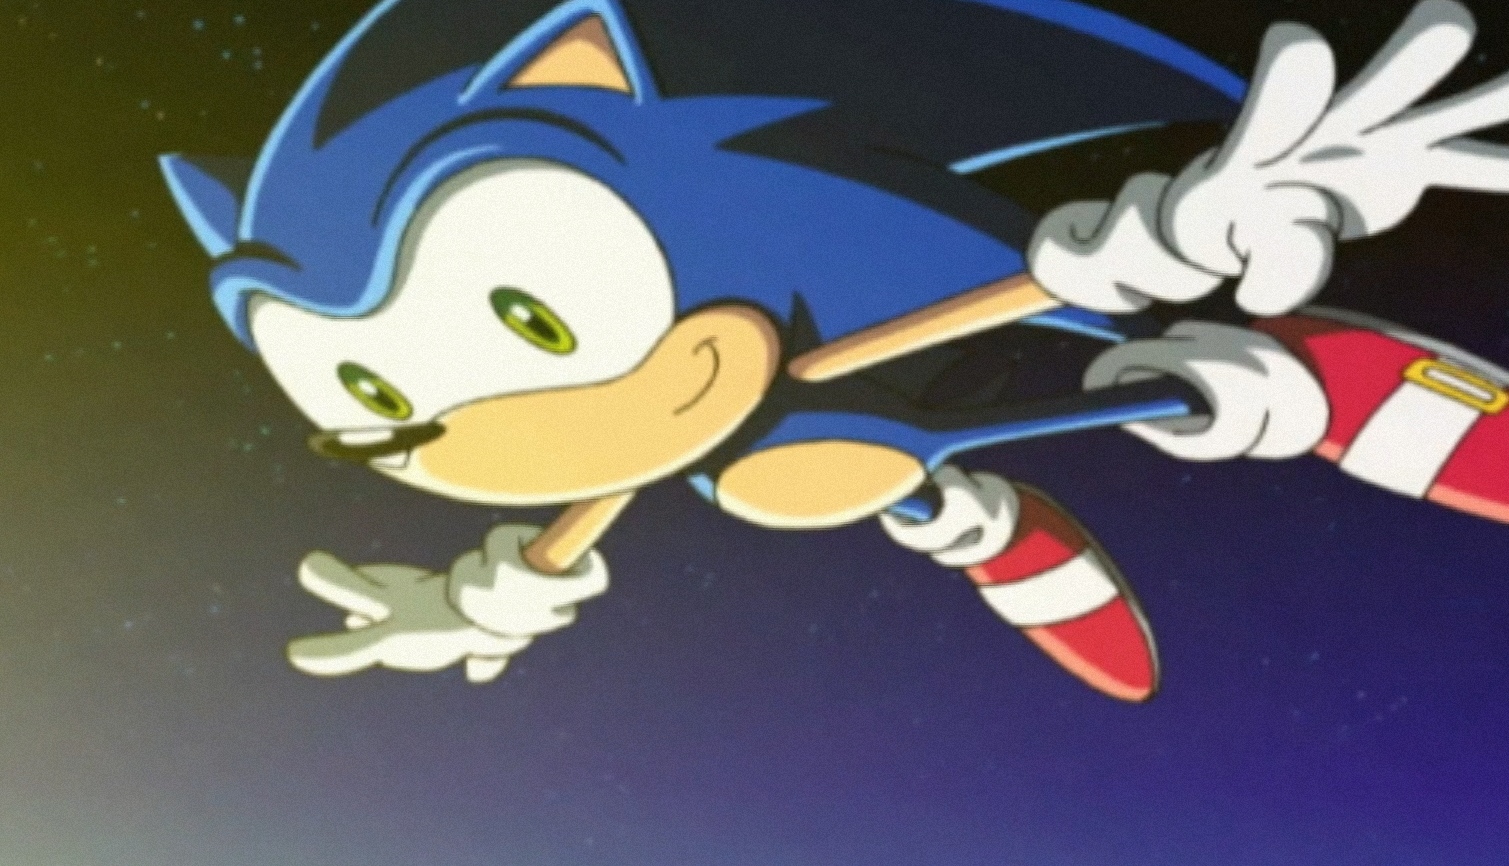 ❄️xeternalFREEZEbryx❄️ on X: Drawing Classic Sonic in different animation  styles from his origins  / X